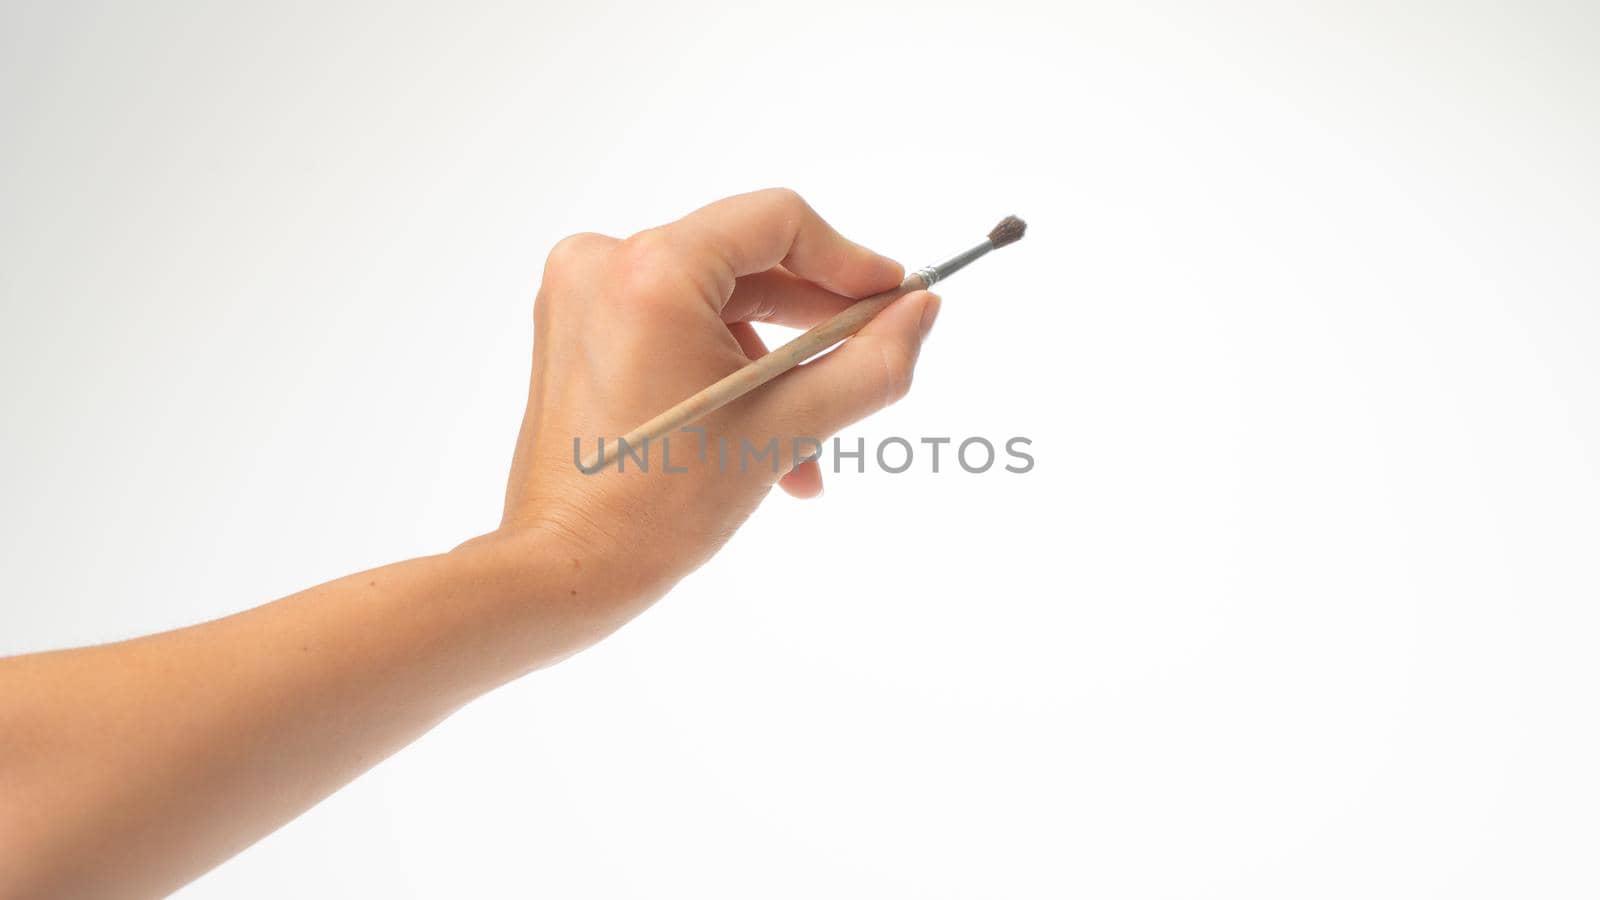 A woman's left hand holds a brush to draw on a white background